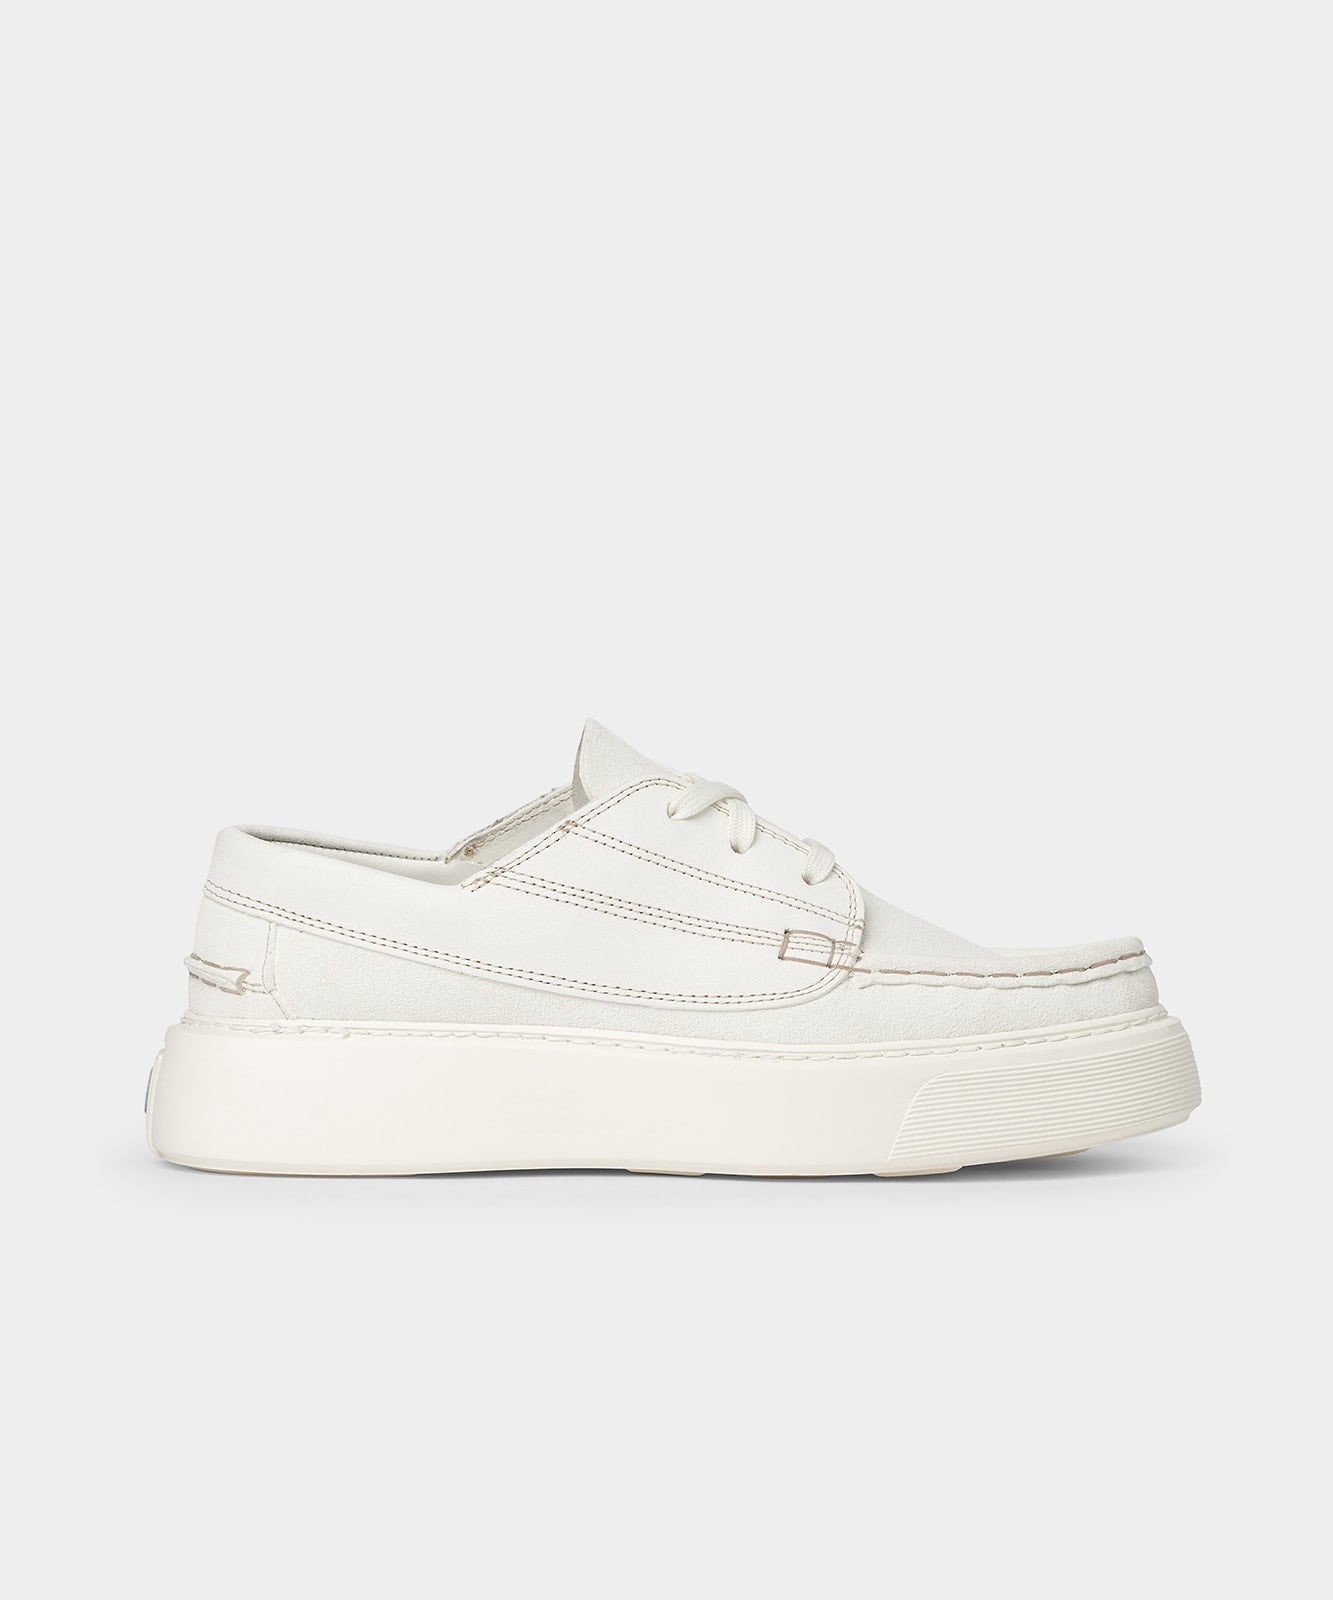 Tahoe Moc White Suede